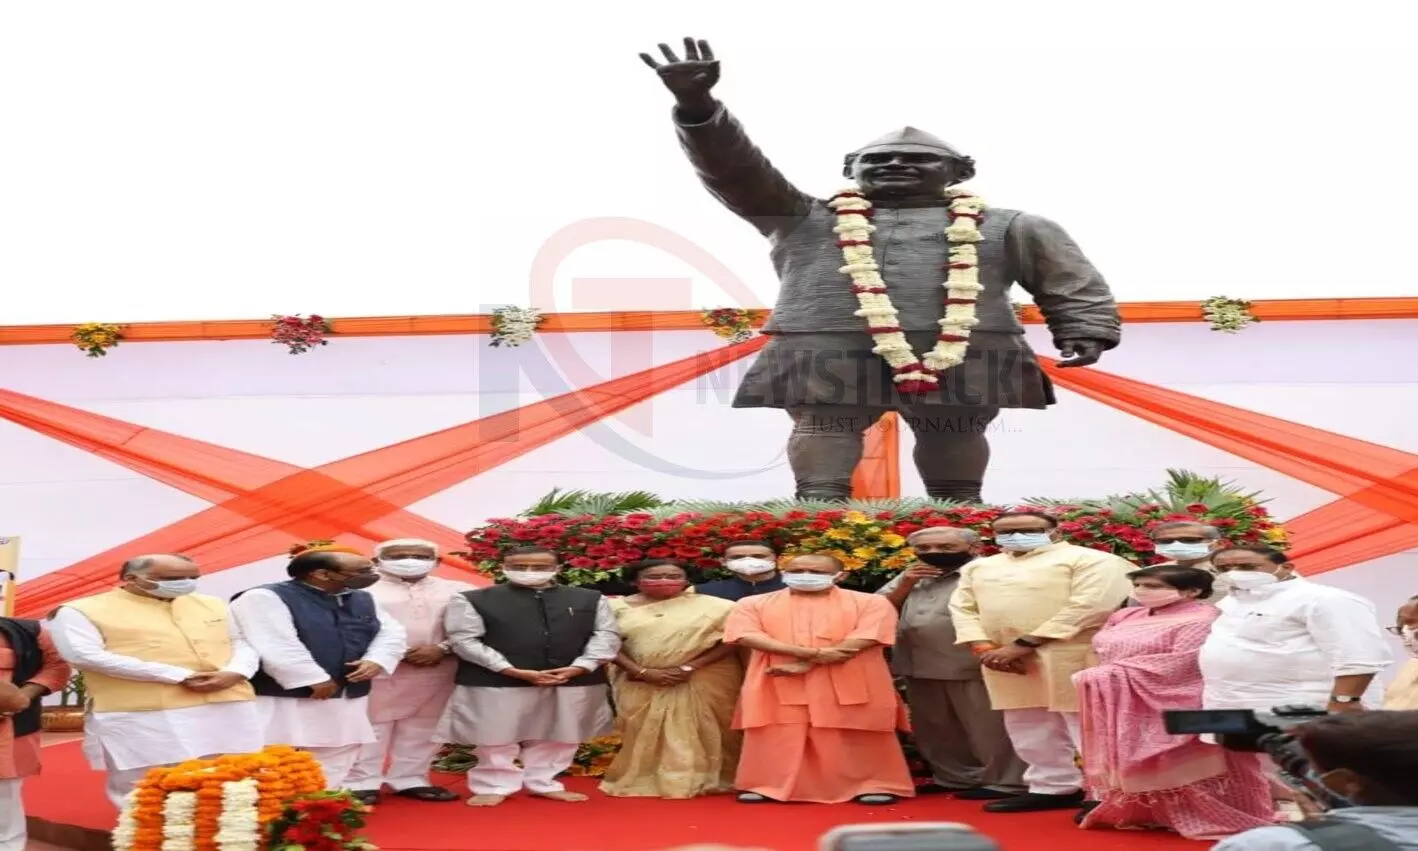 The statue located at Yojna Bhawan was unveiled